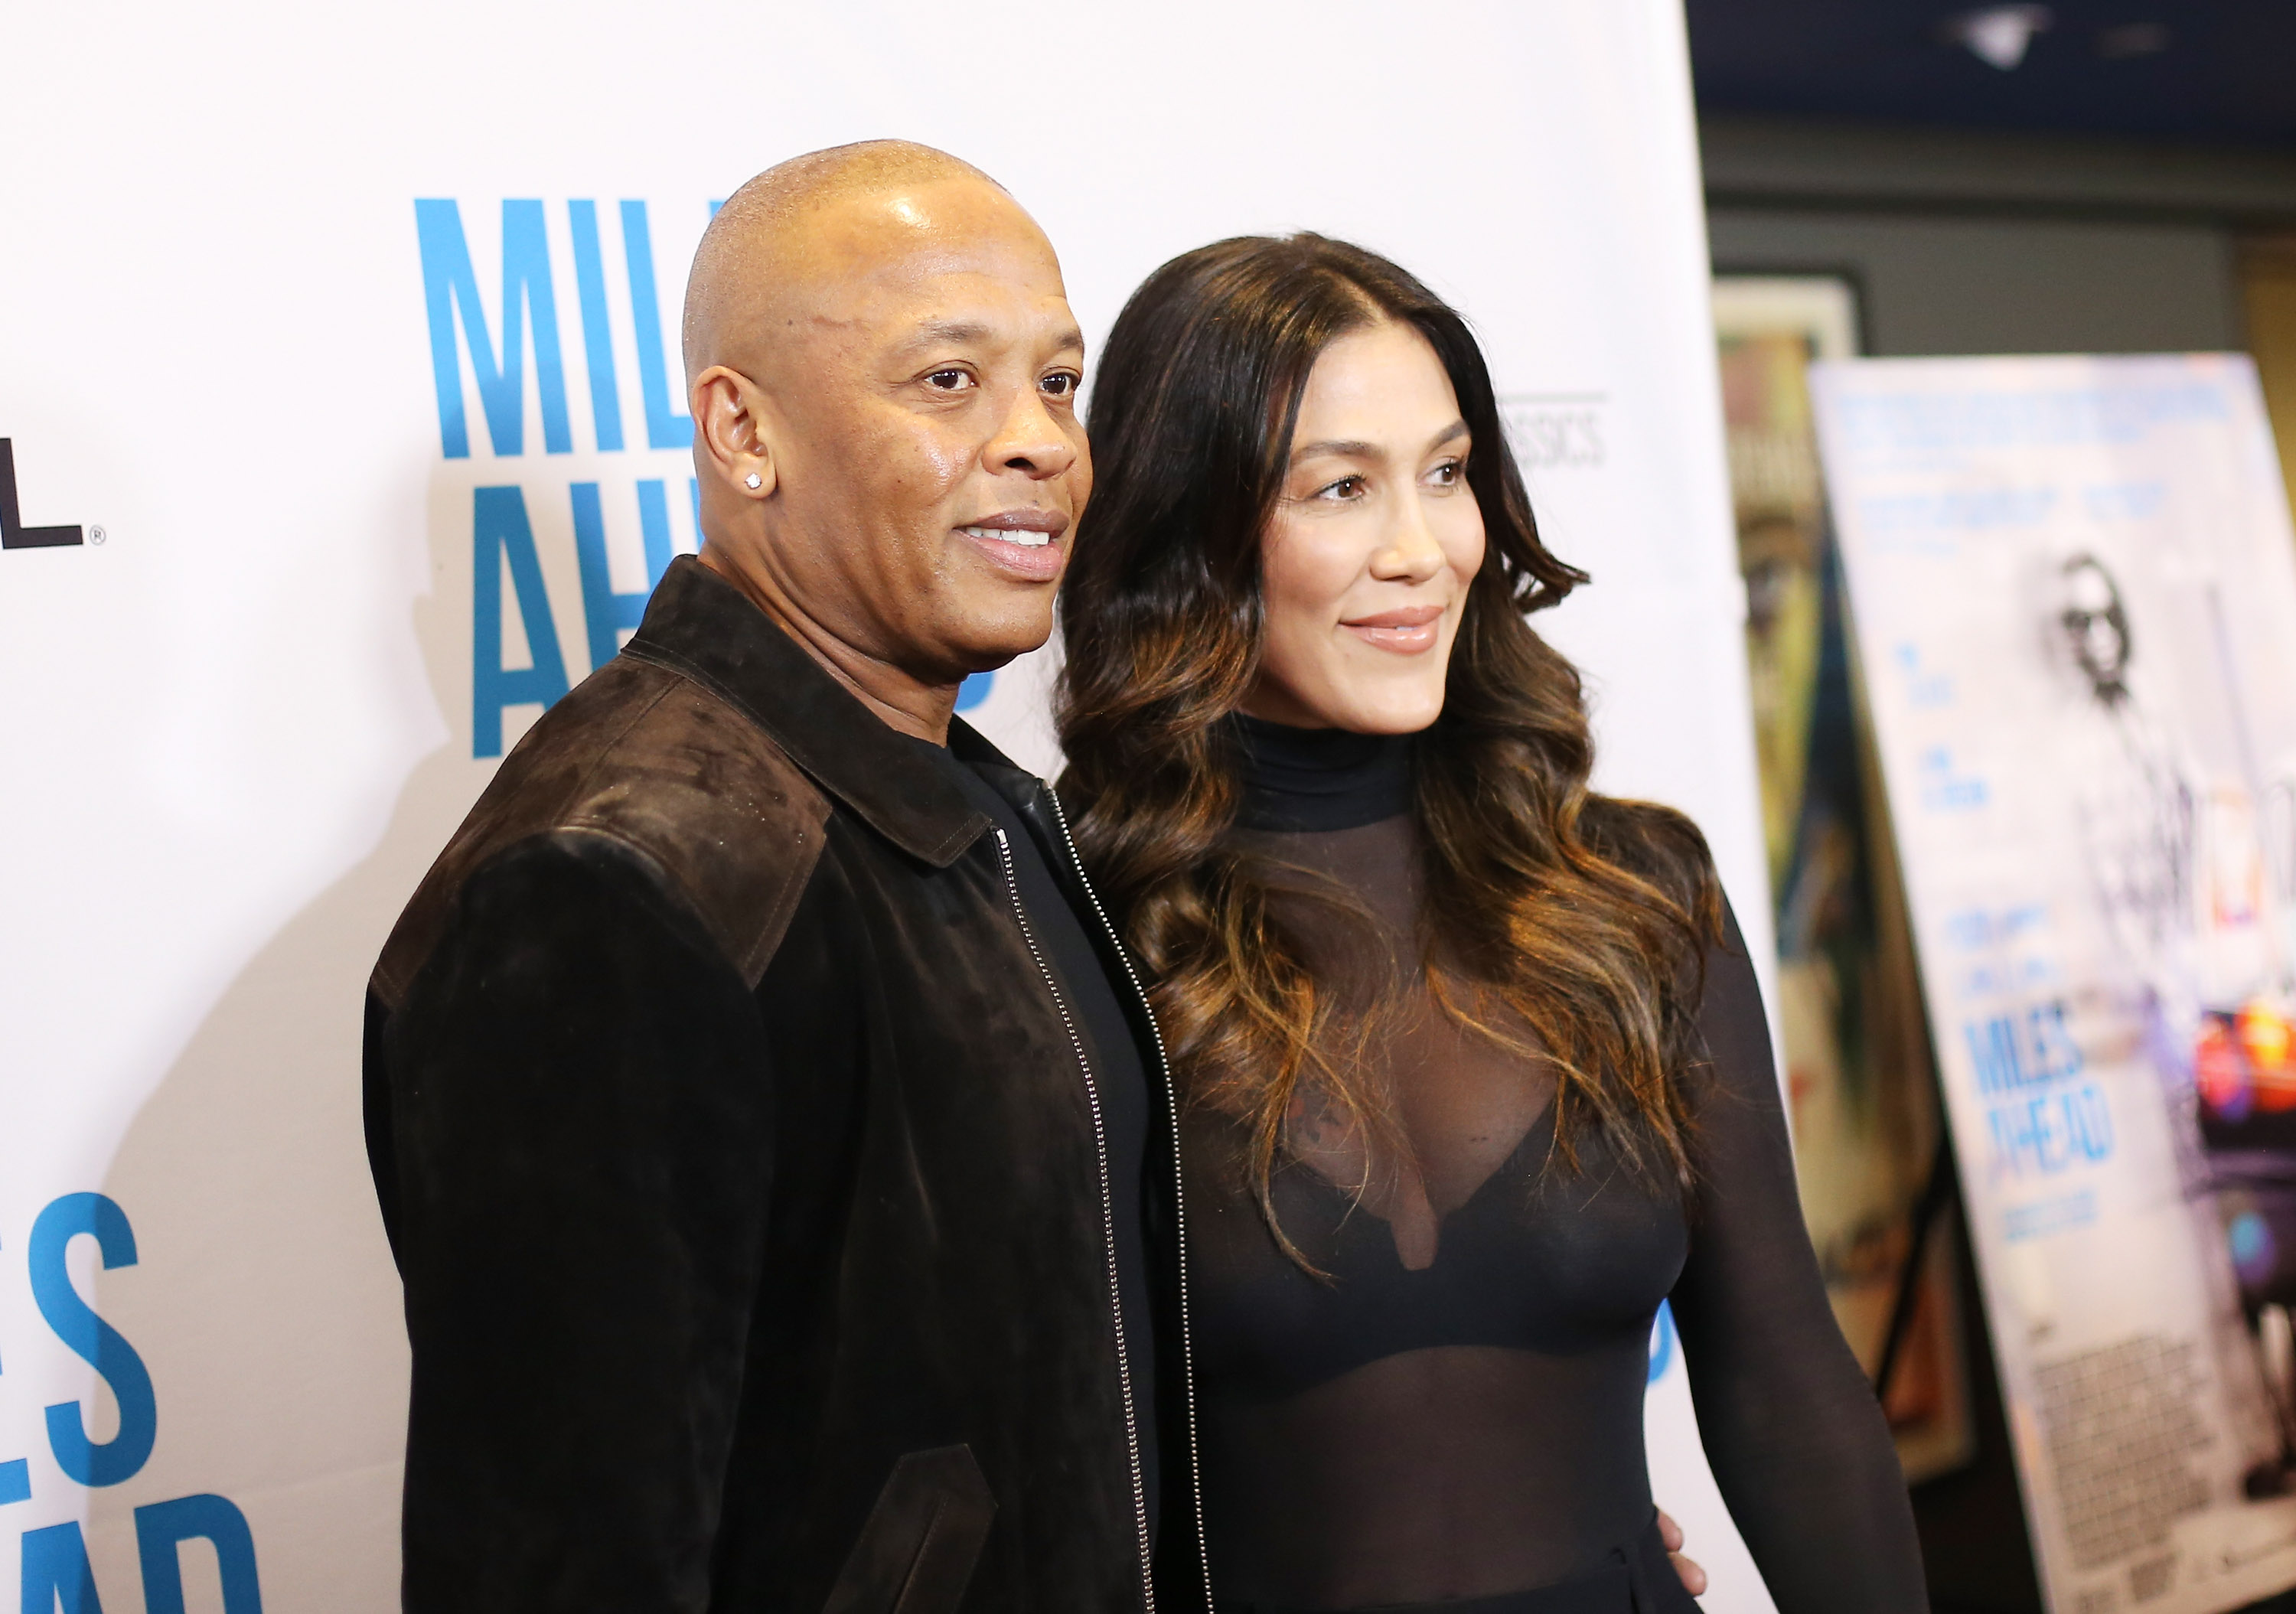 Dr. Dre and Nicole Young arrive at the Los Angeles premiere of Sony Pictures Classics' "Miles Ahead" at Writers Guild Theater on March 29, 2016, in Beverly Hills, California. | Source: Getty Images